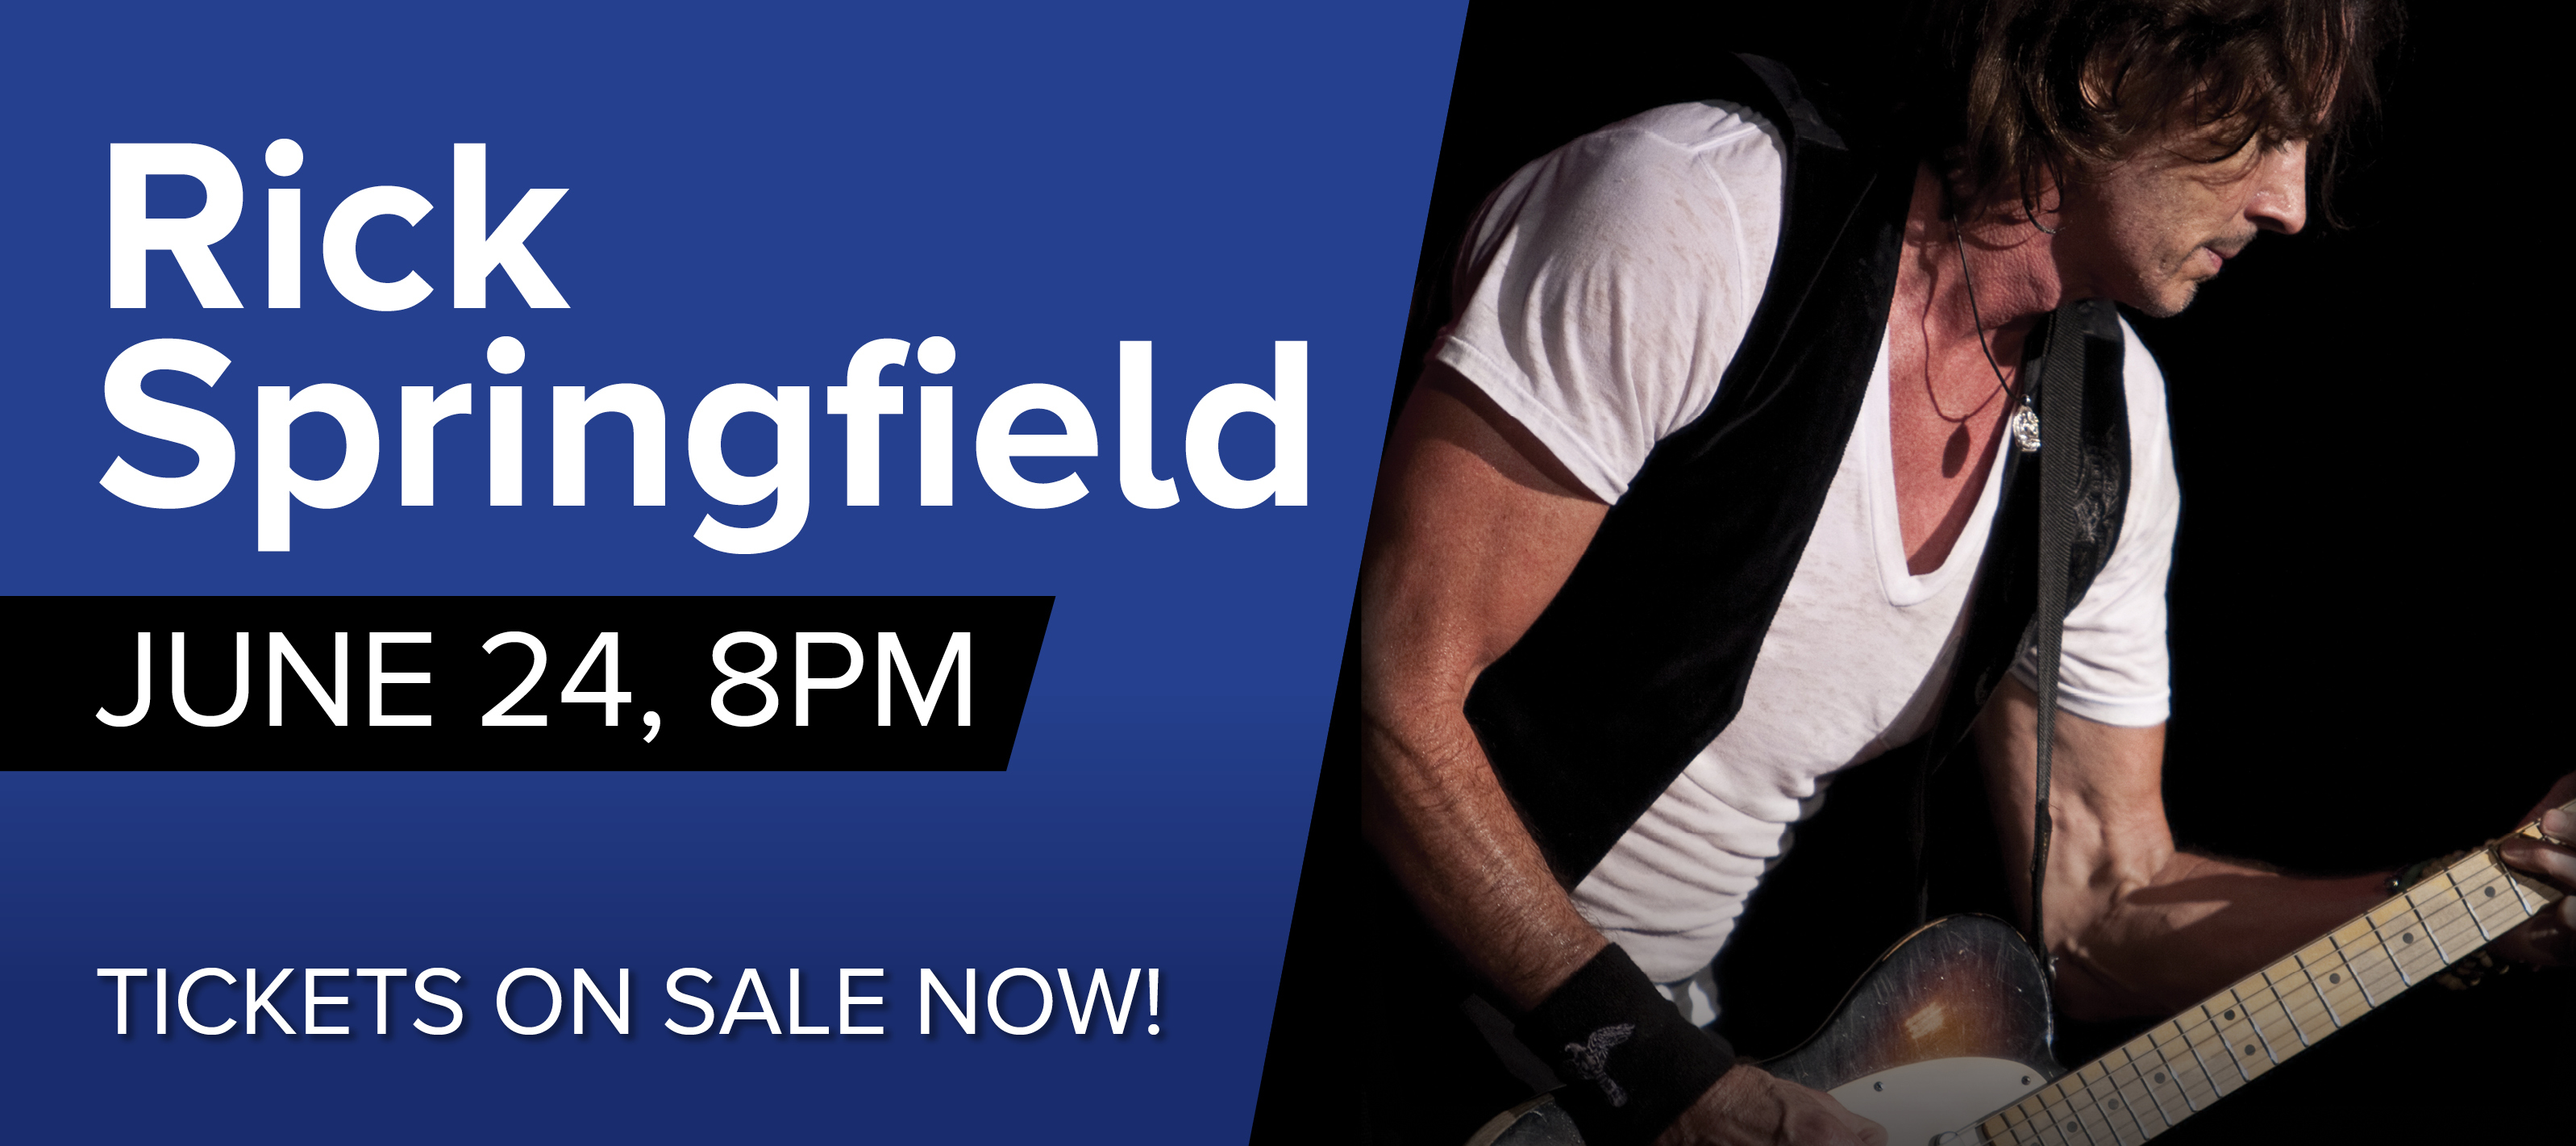 Rick Springfield June 24 at 8pm. Tickets on sale now